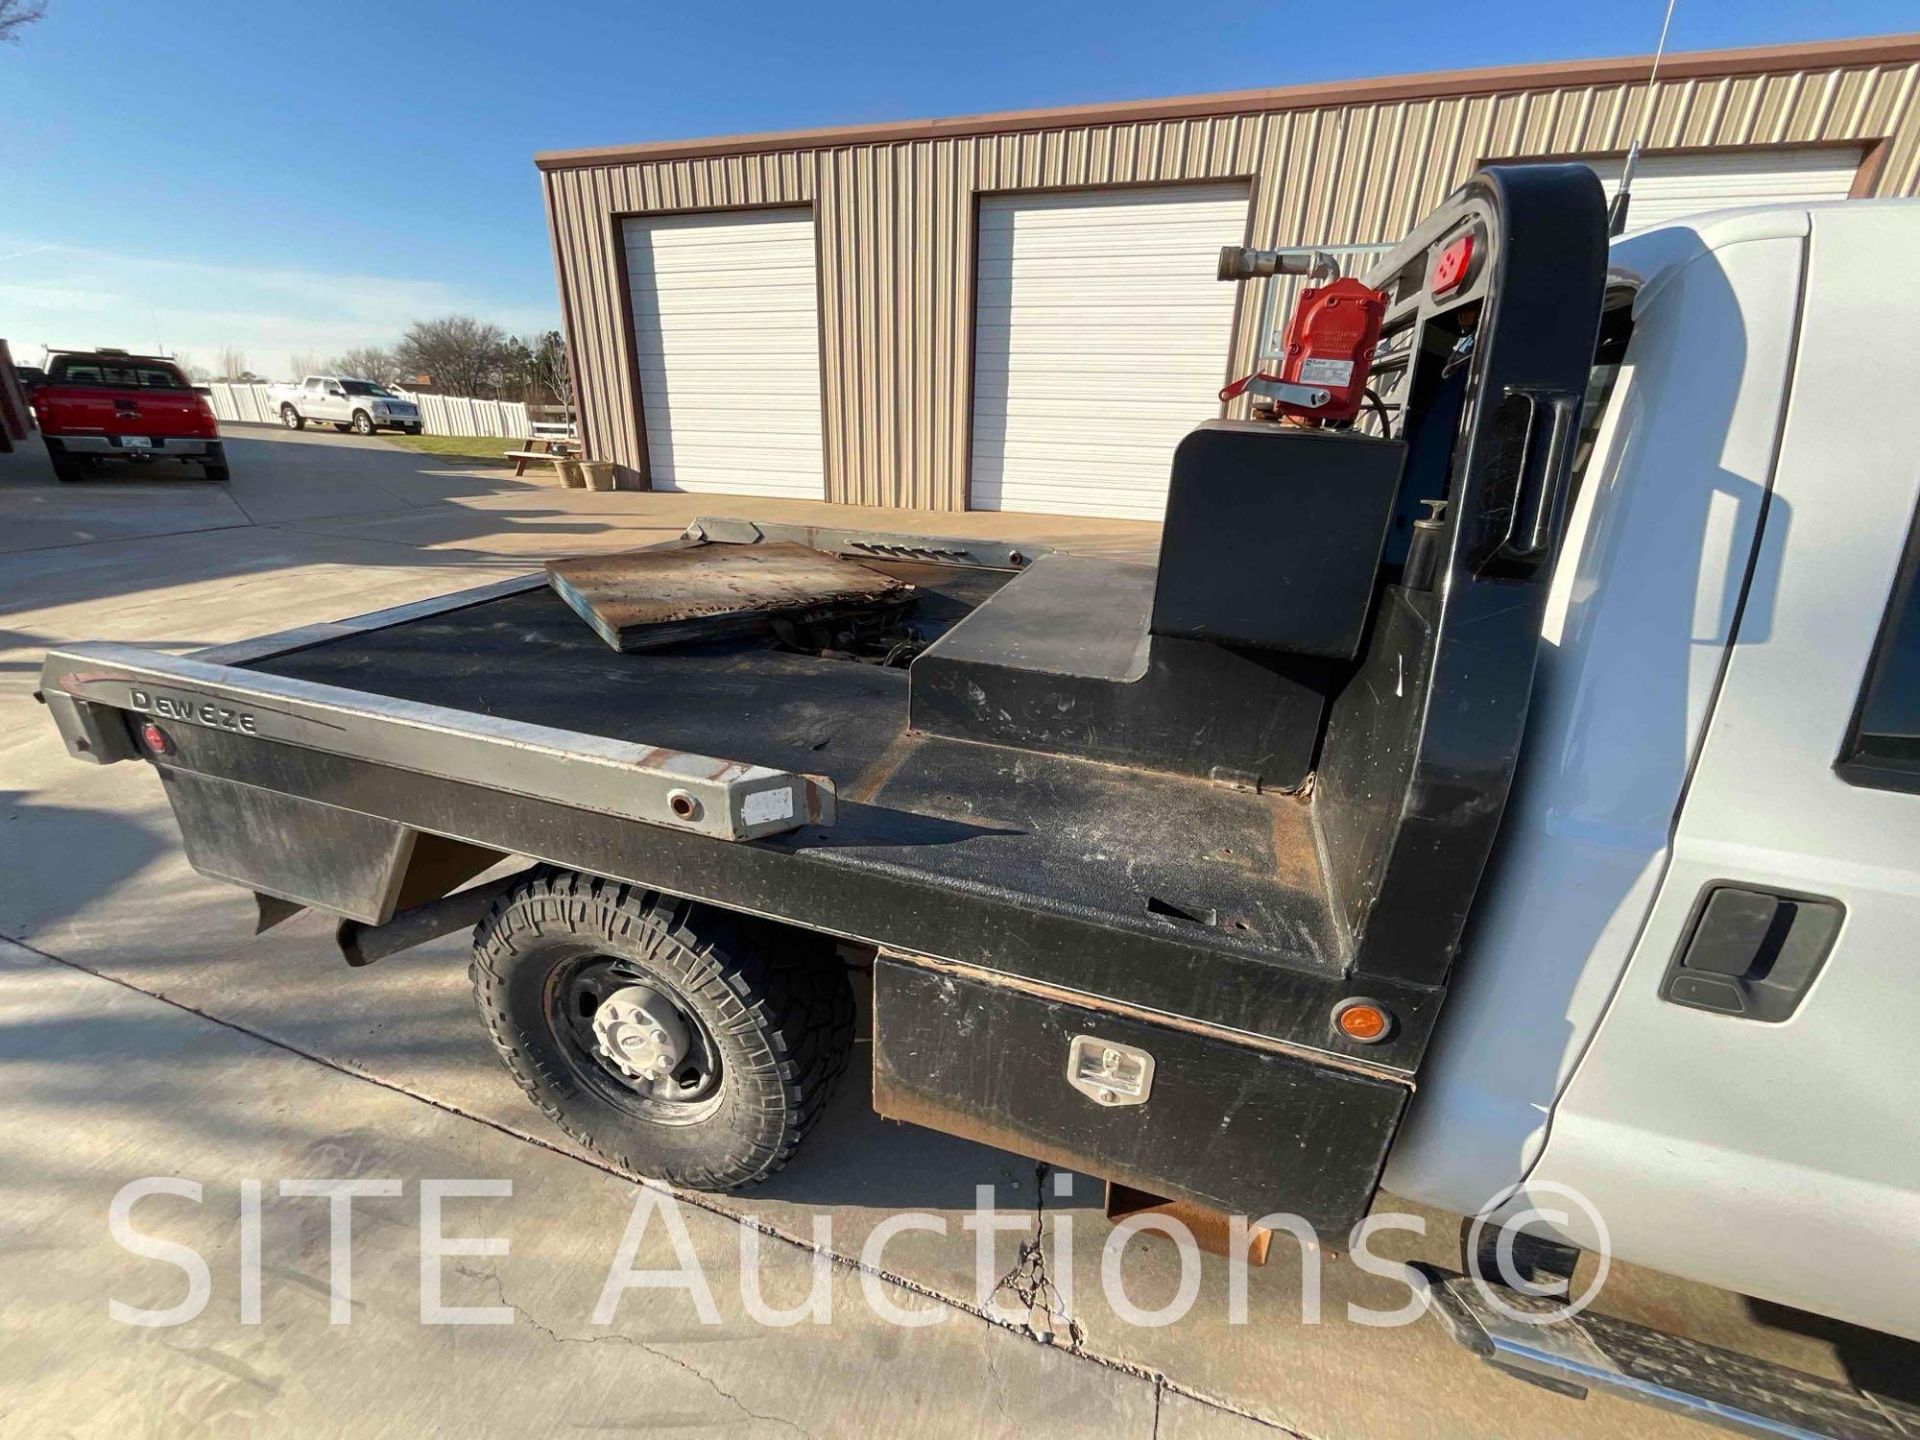 2011 Ford F250 SD Crew Cab Flatbed Truck - Image 13 of 31